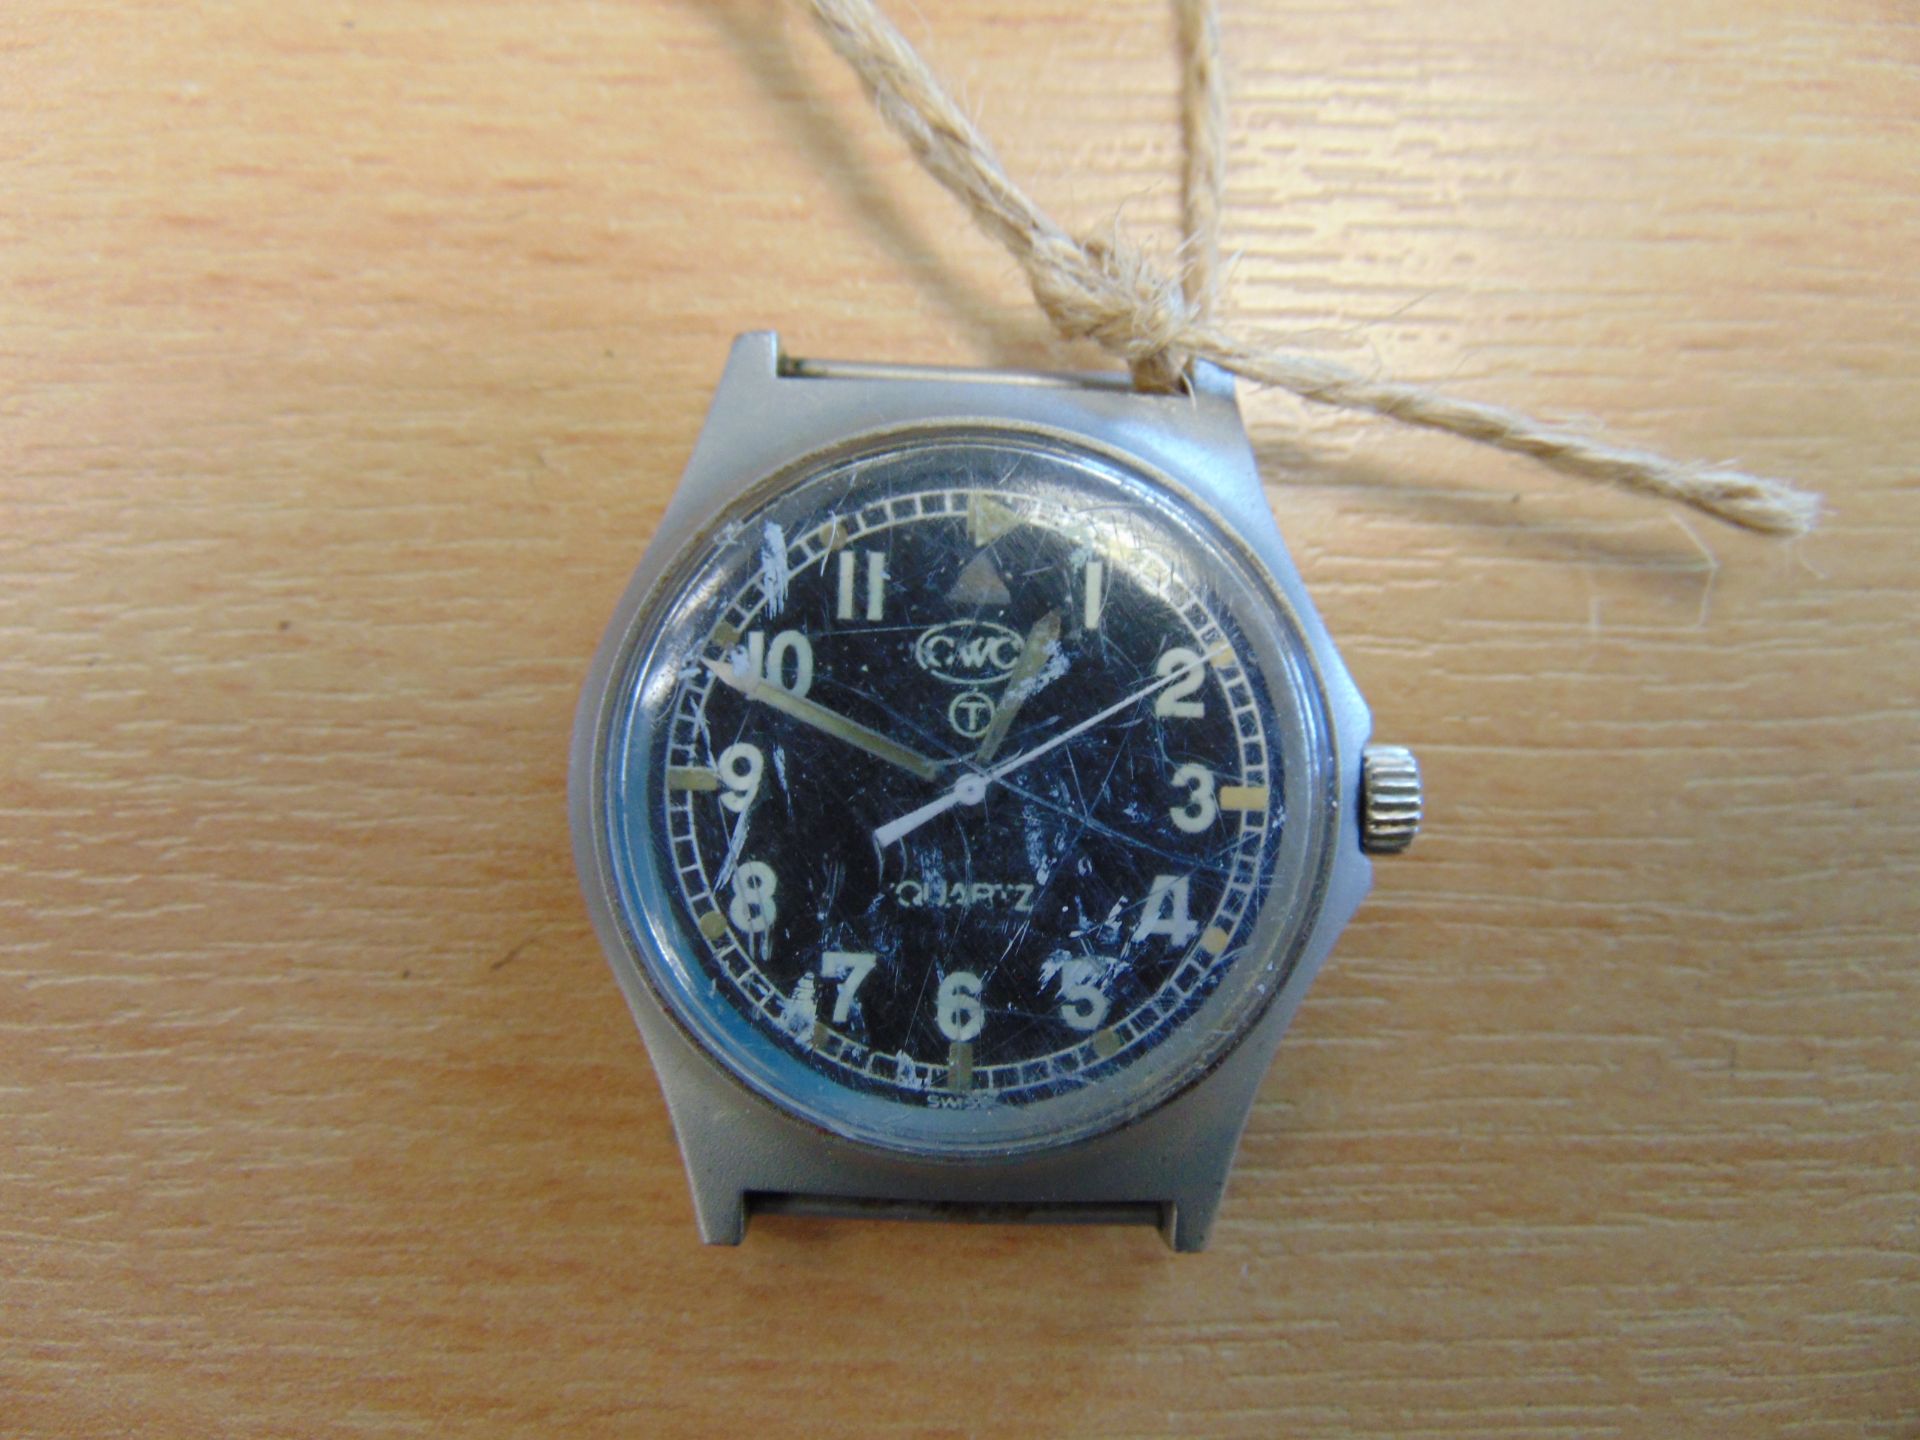 Rare CWC (Cabot Watch Co Switzerland) 0552 Royal Marines / Navy Issue FAT BOY Service Watch - Image 2 of 4